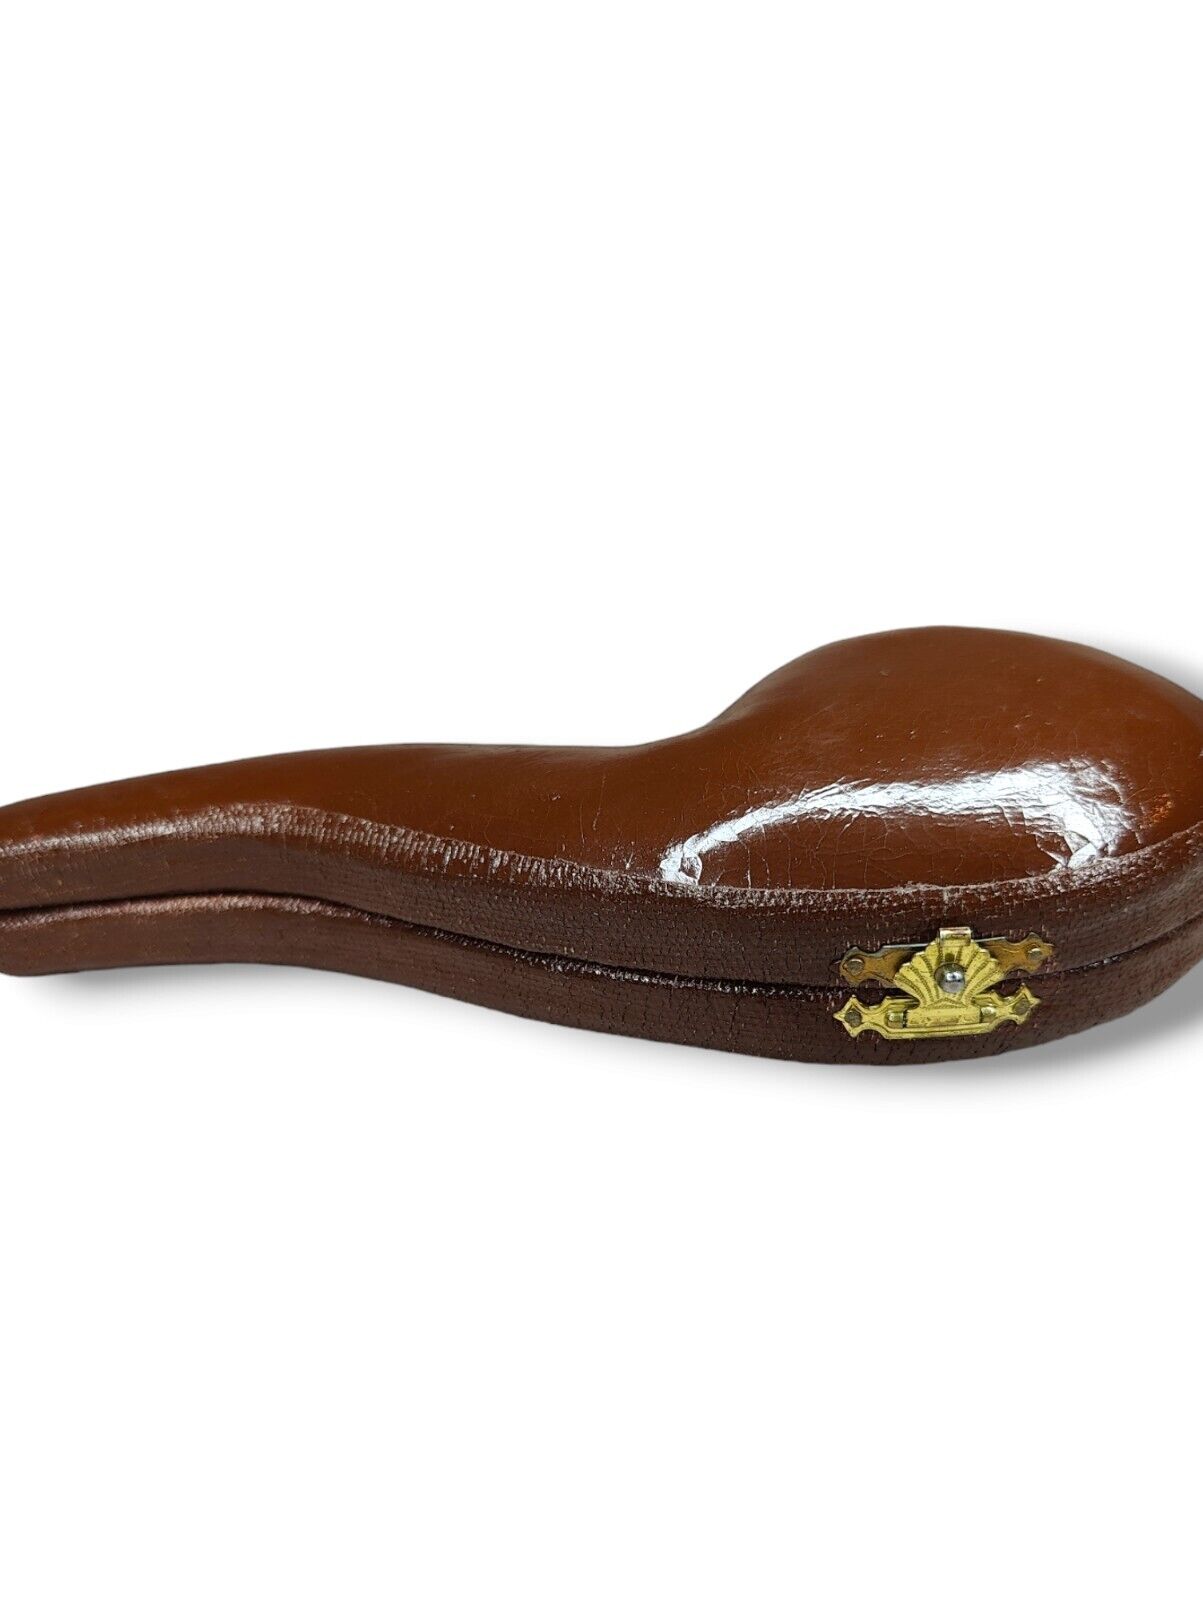 CAO Meerschaum Tobacco Pipe CASE ONLY NO PIPE